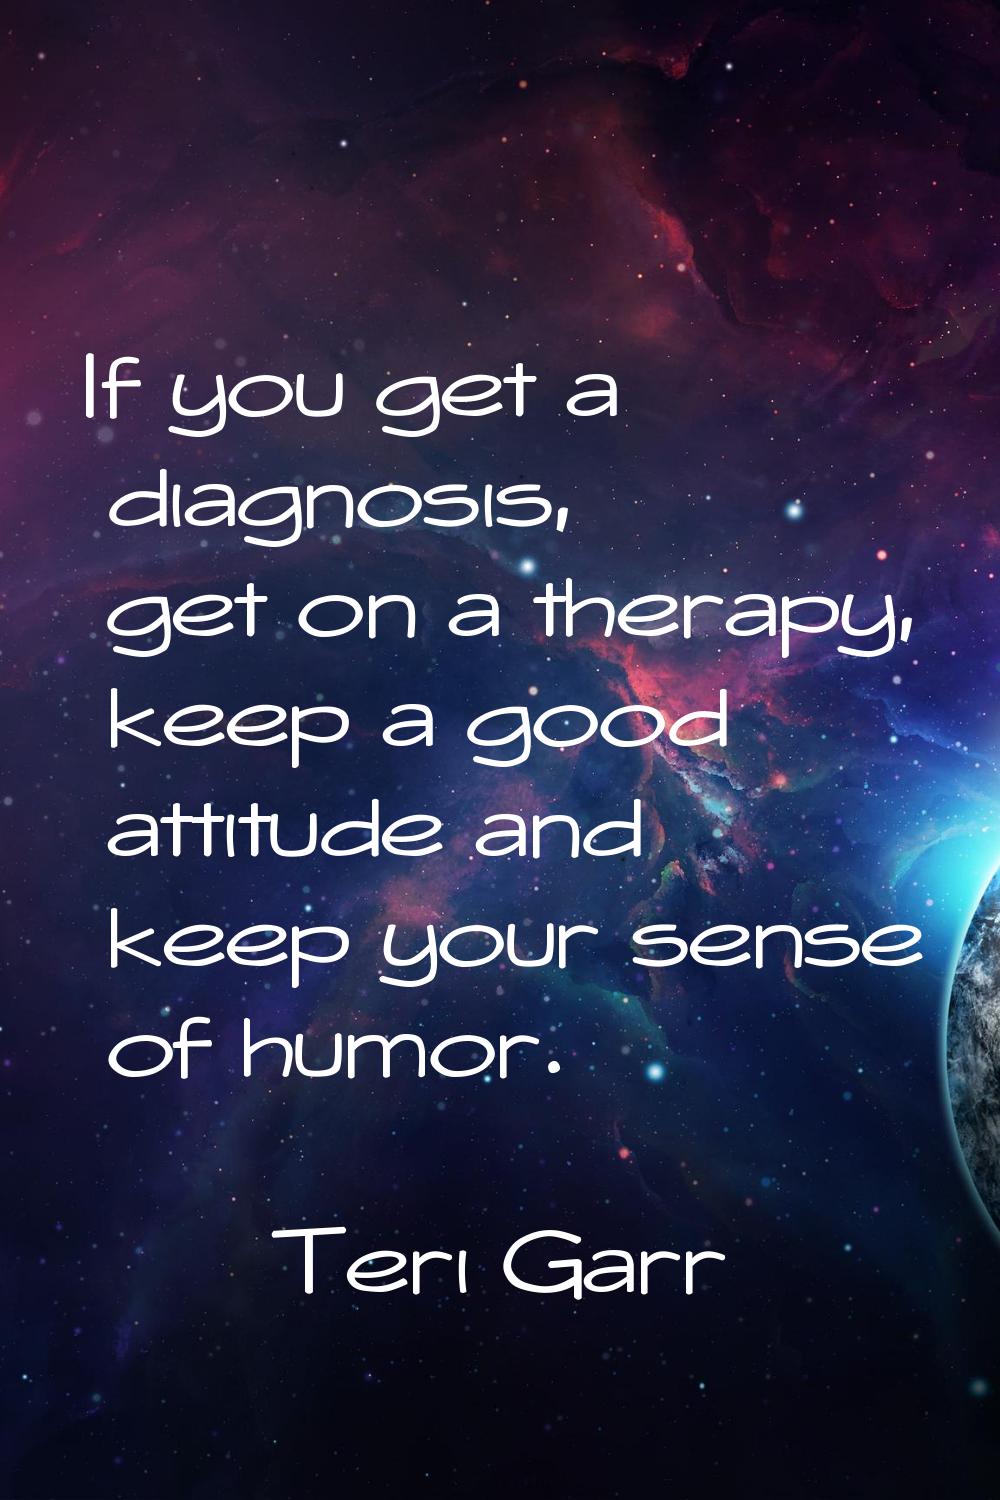 If you get a diagnosis, get on a therapy, keep a good attitude and keep your sense of humor.